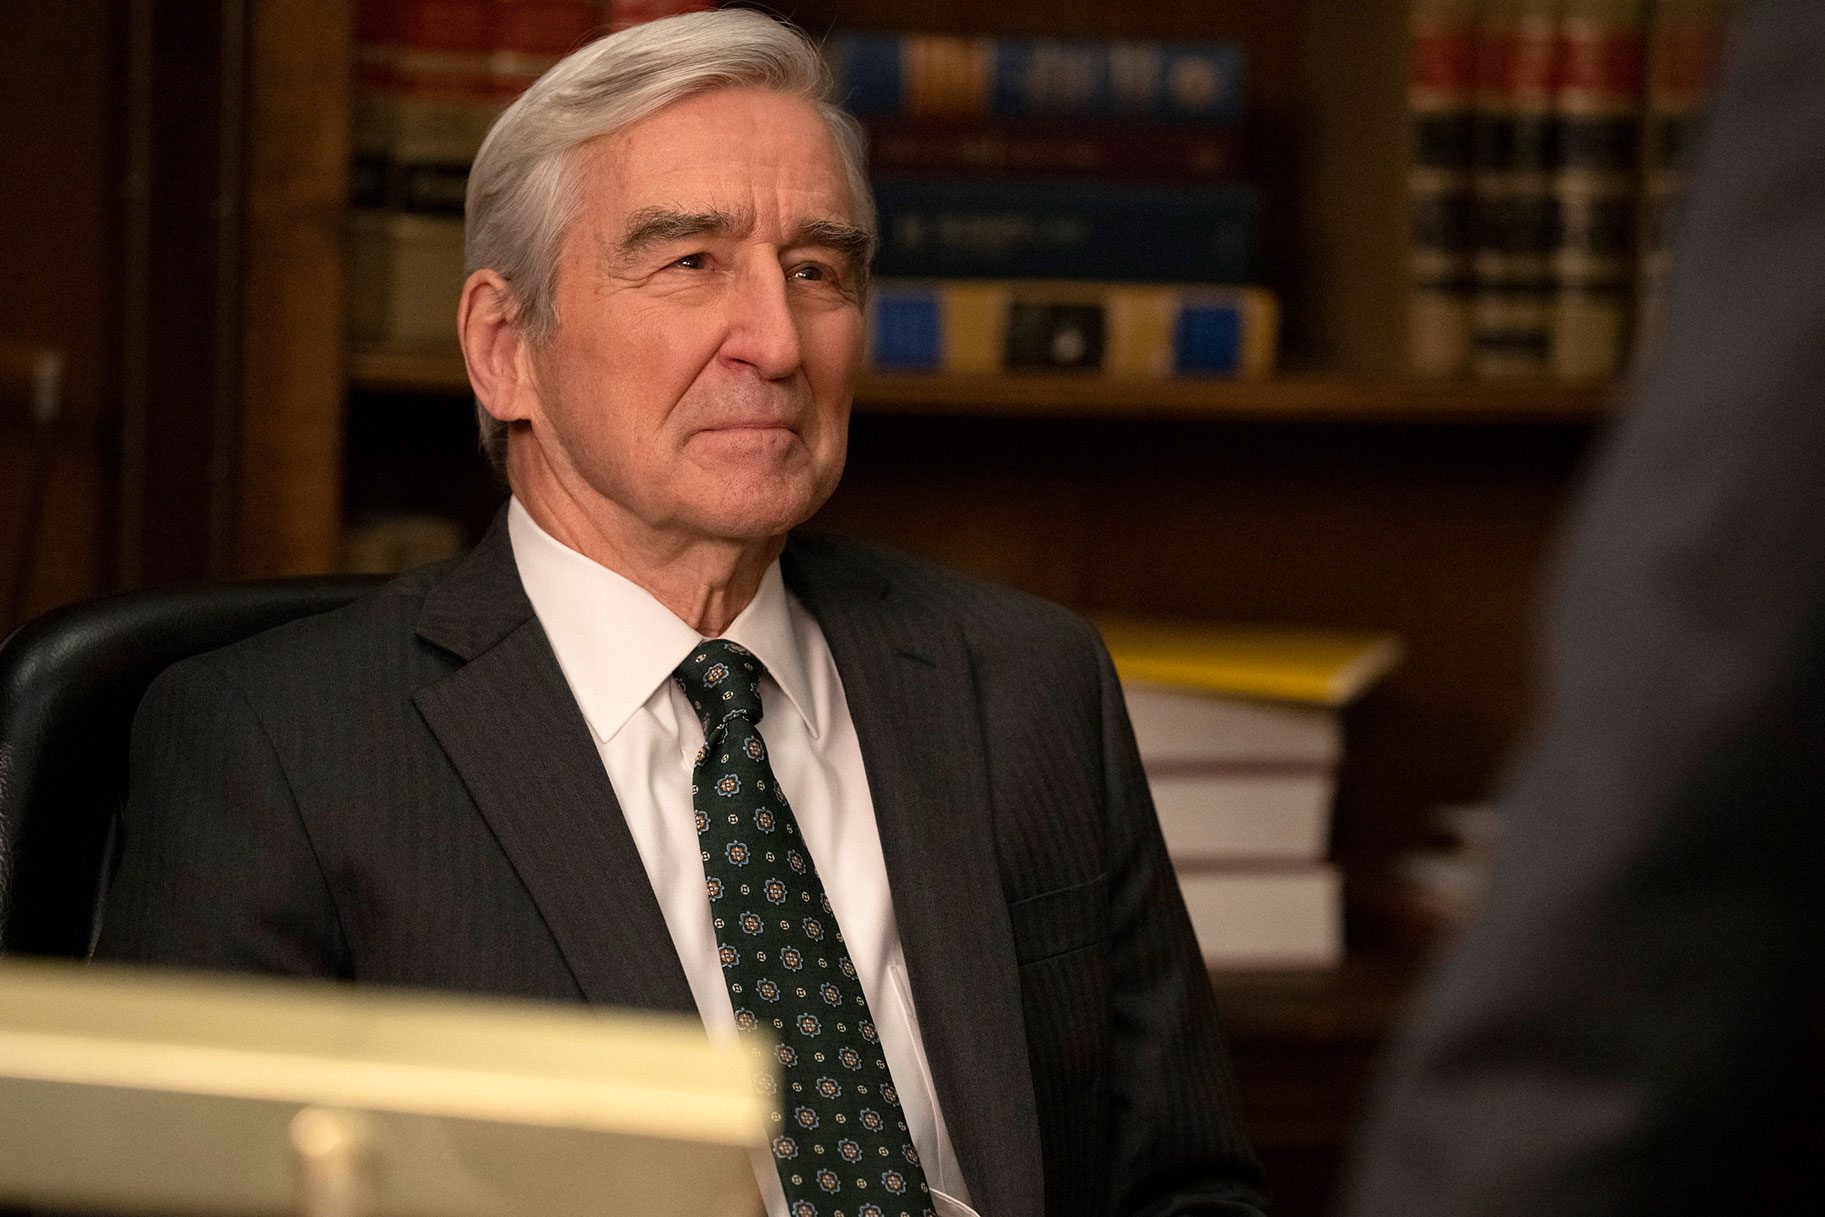 law-and-order-sam-waterson2-1189387